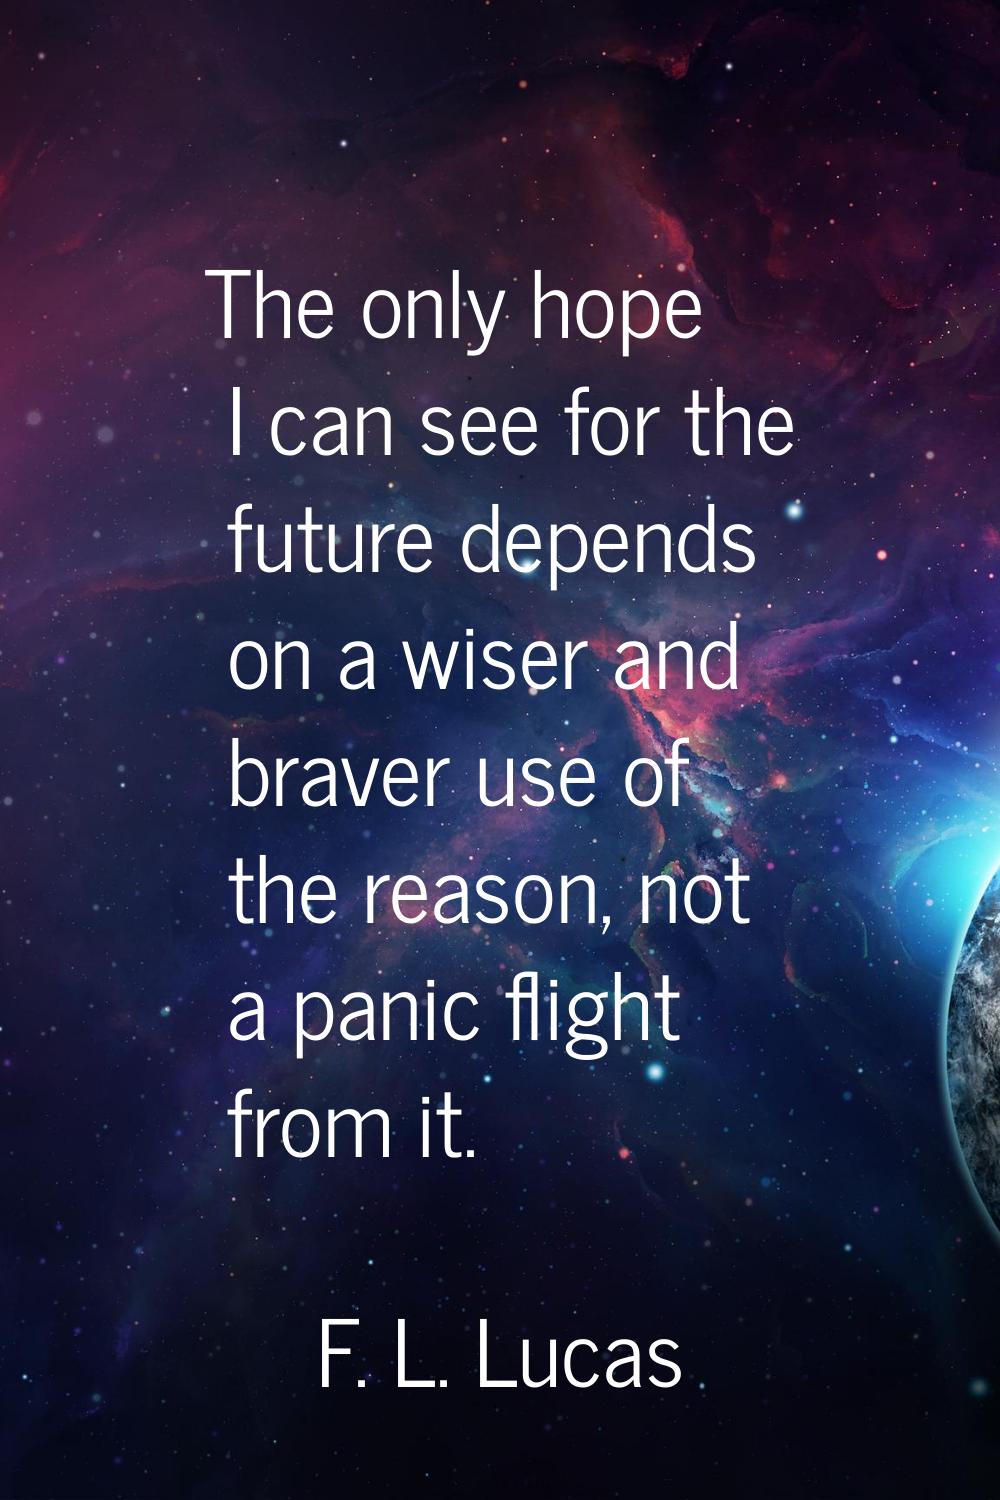 The only hope I can see for the future depends on a wiser and braver use of the reason, not a panic